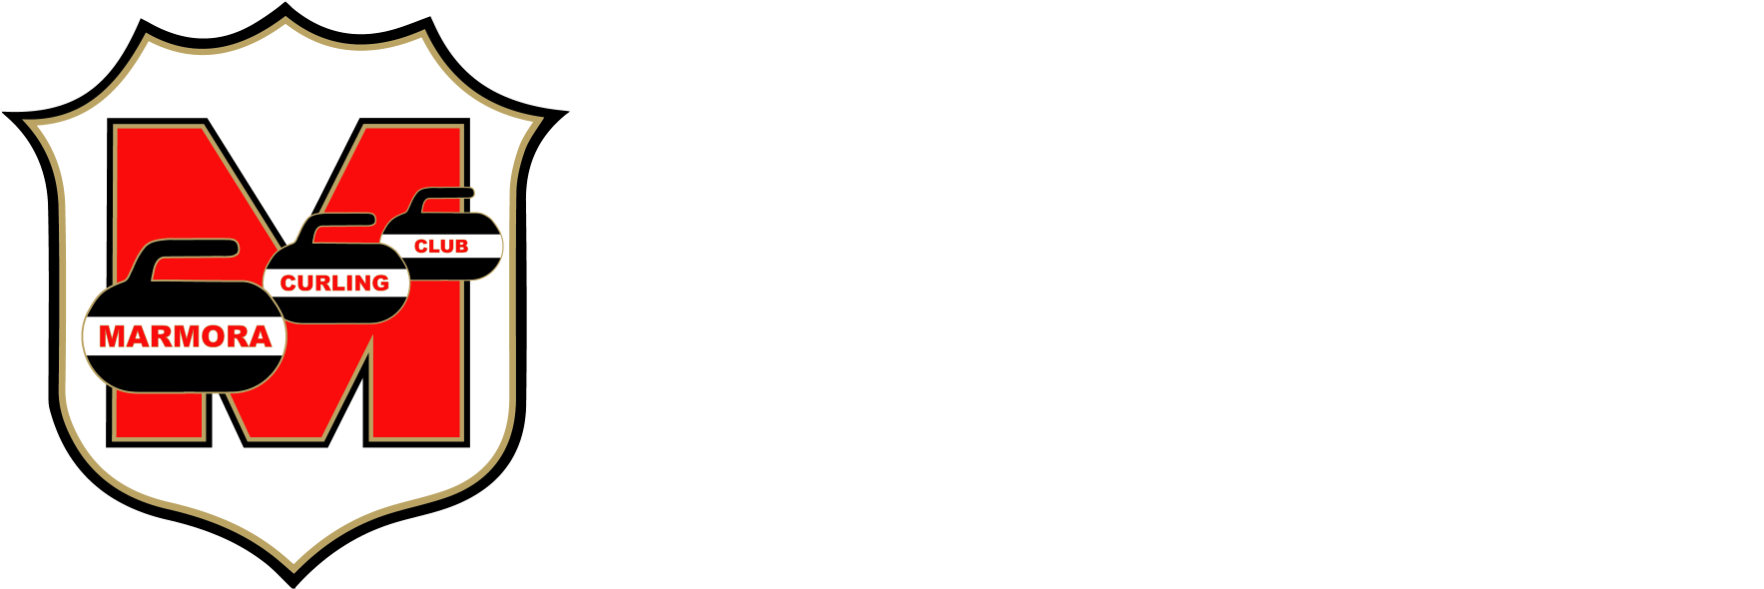 Marmora and Area Curling Club